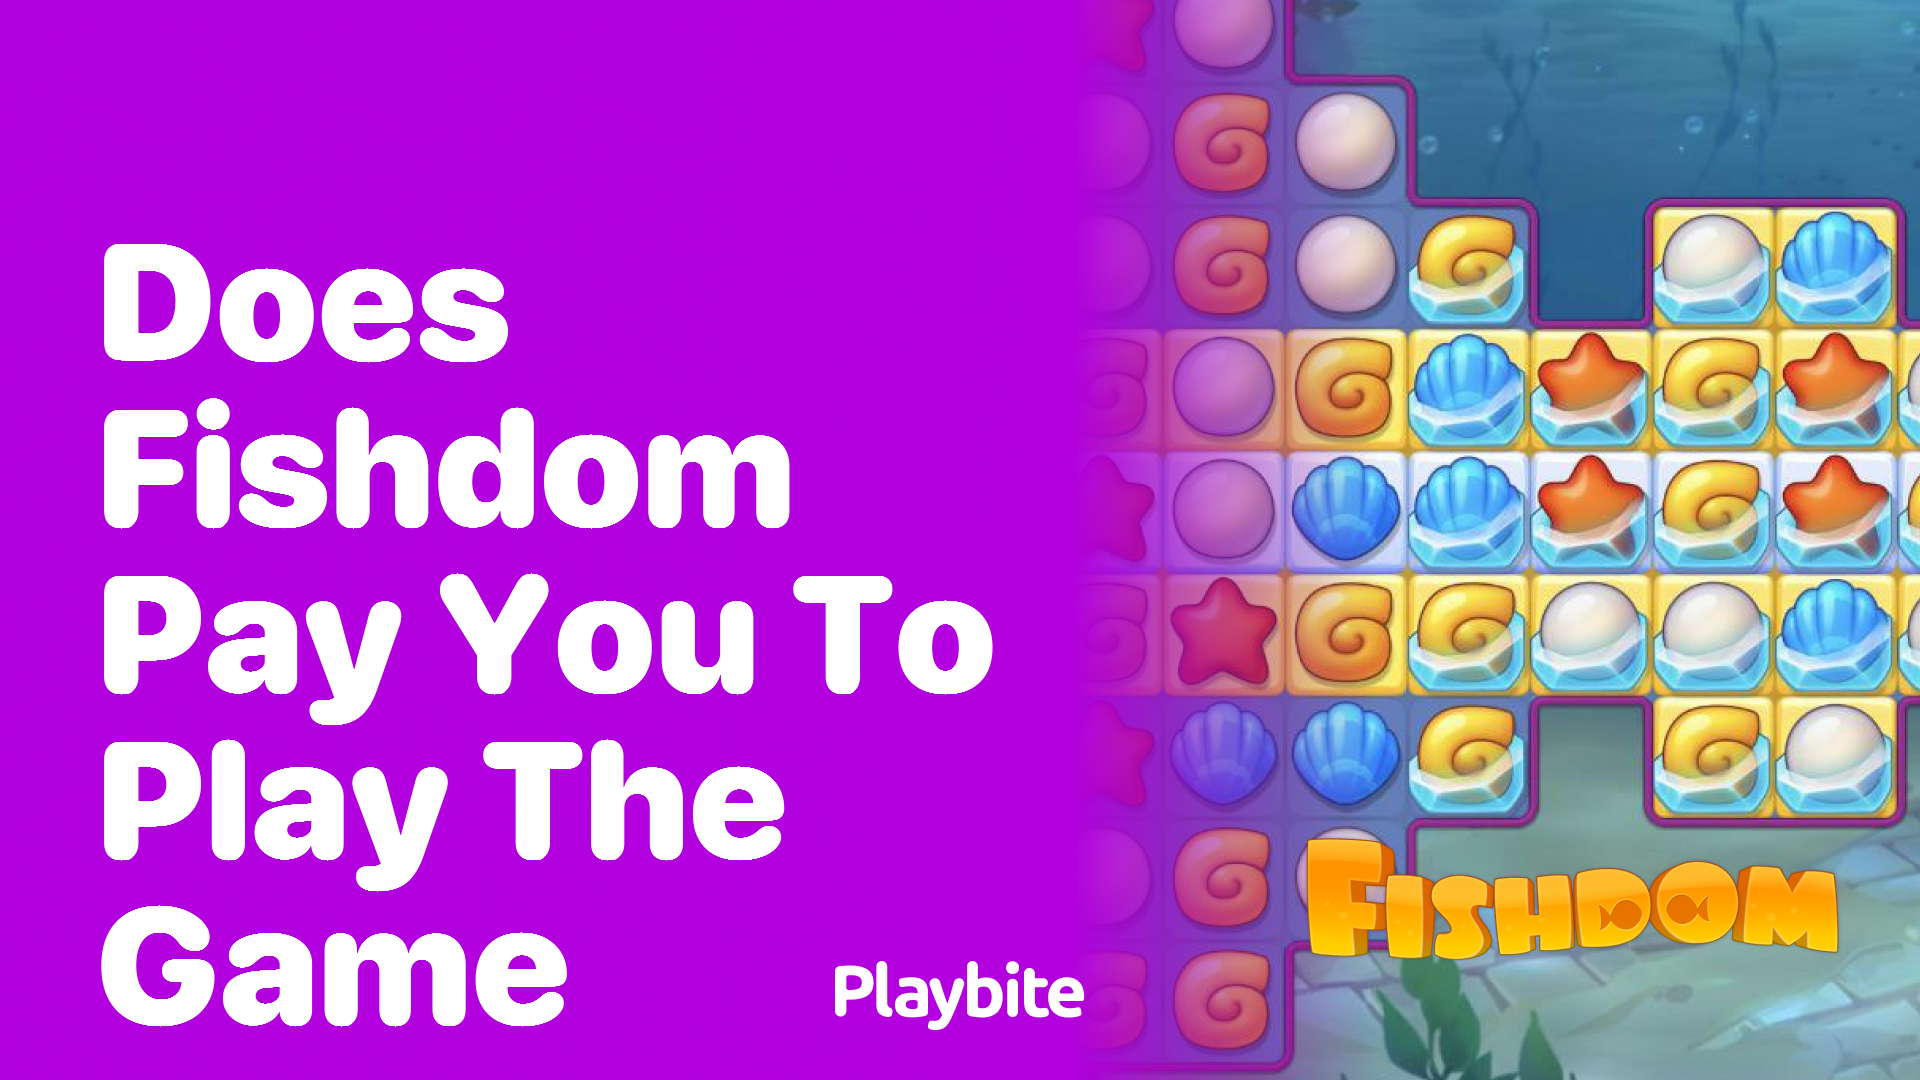 Does Fishdom Pay You to Play the Game?